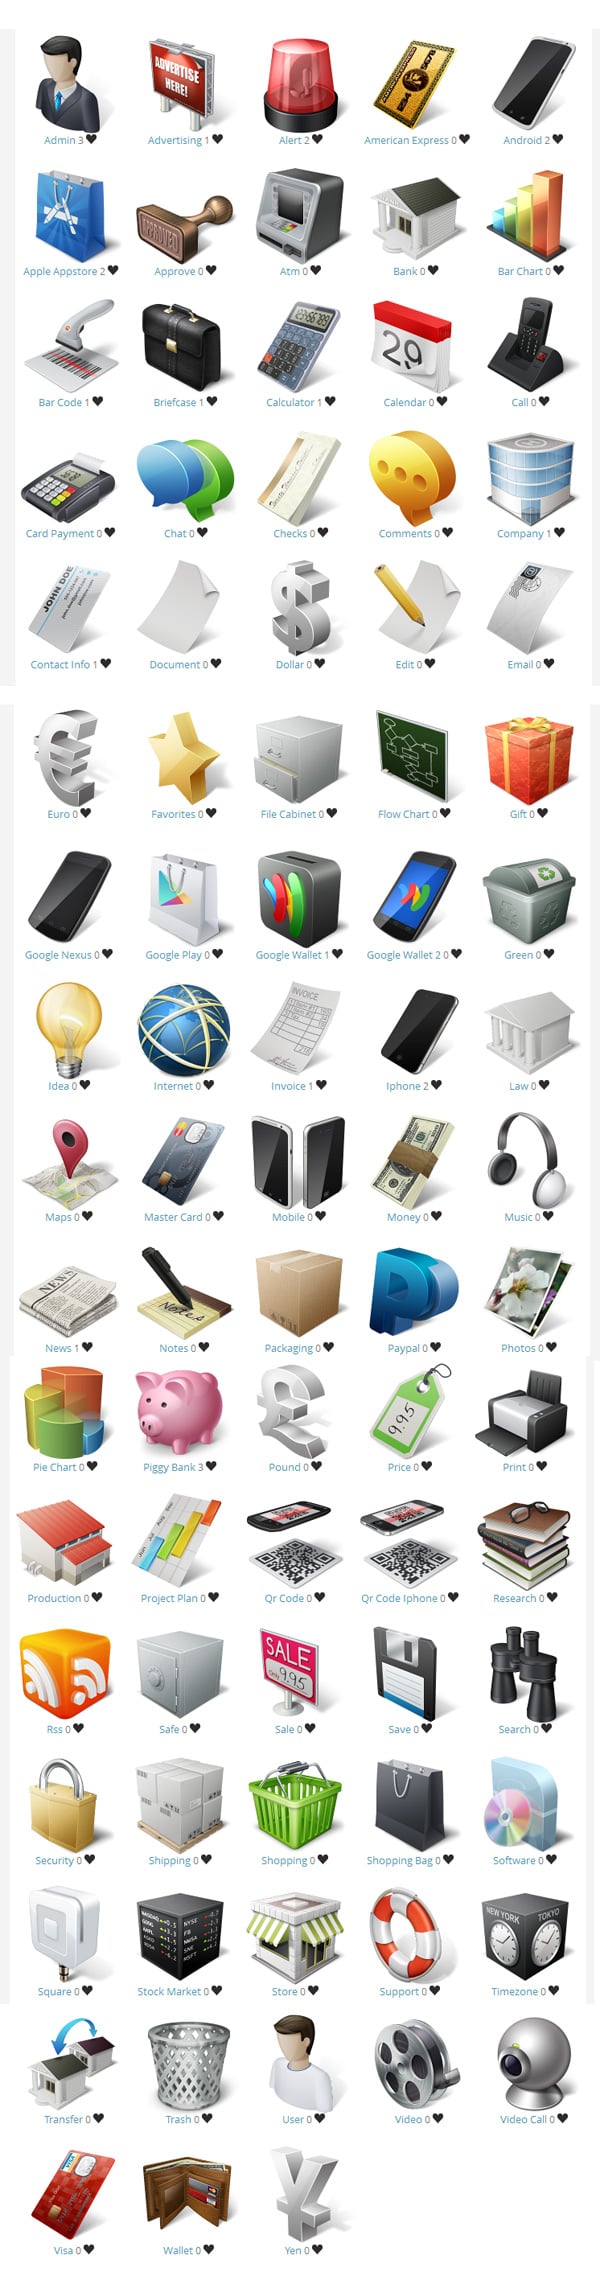 Download free e-Commerce and business icons set